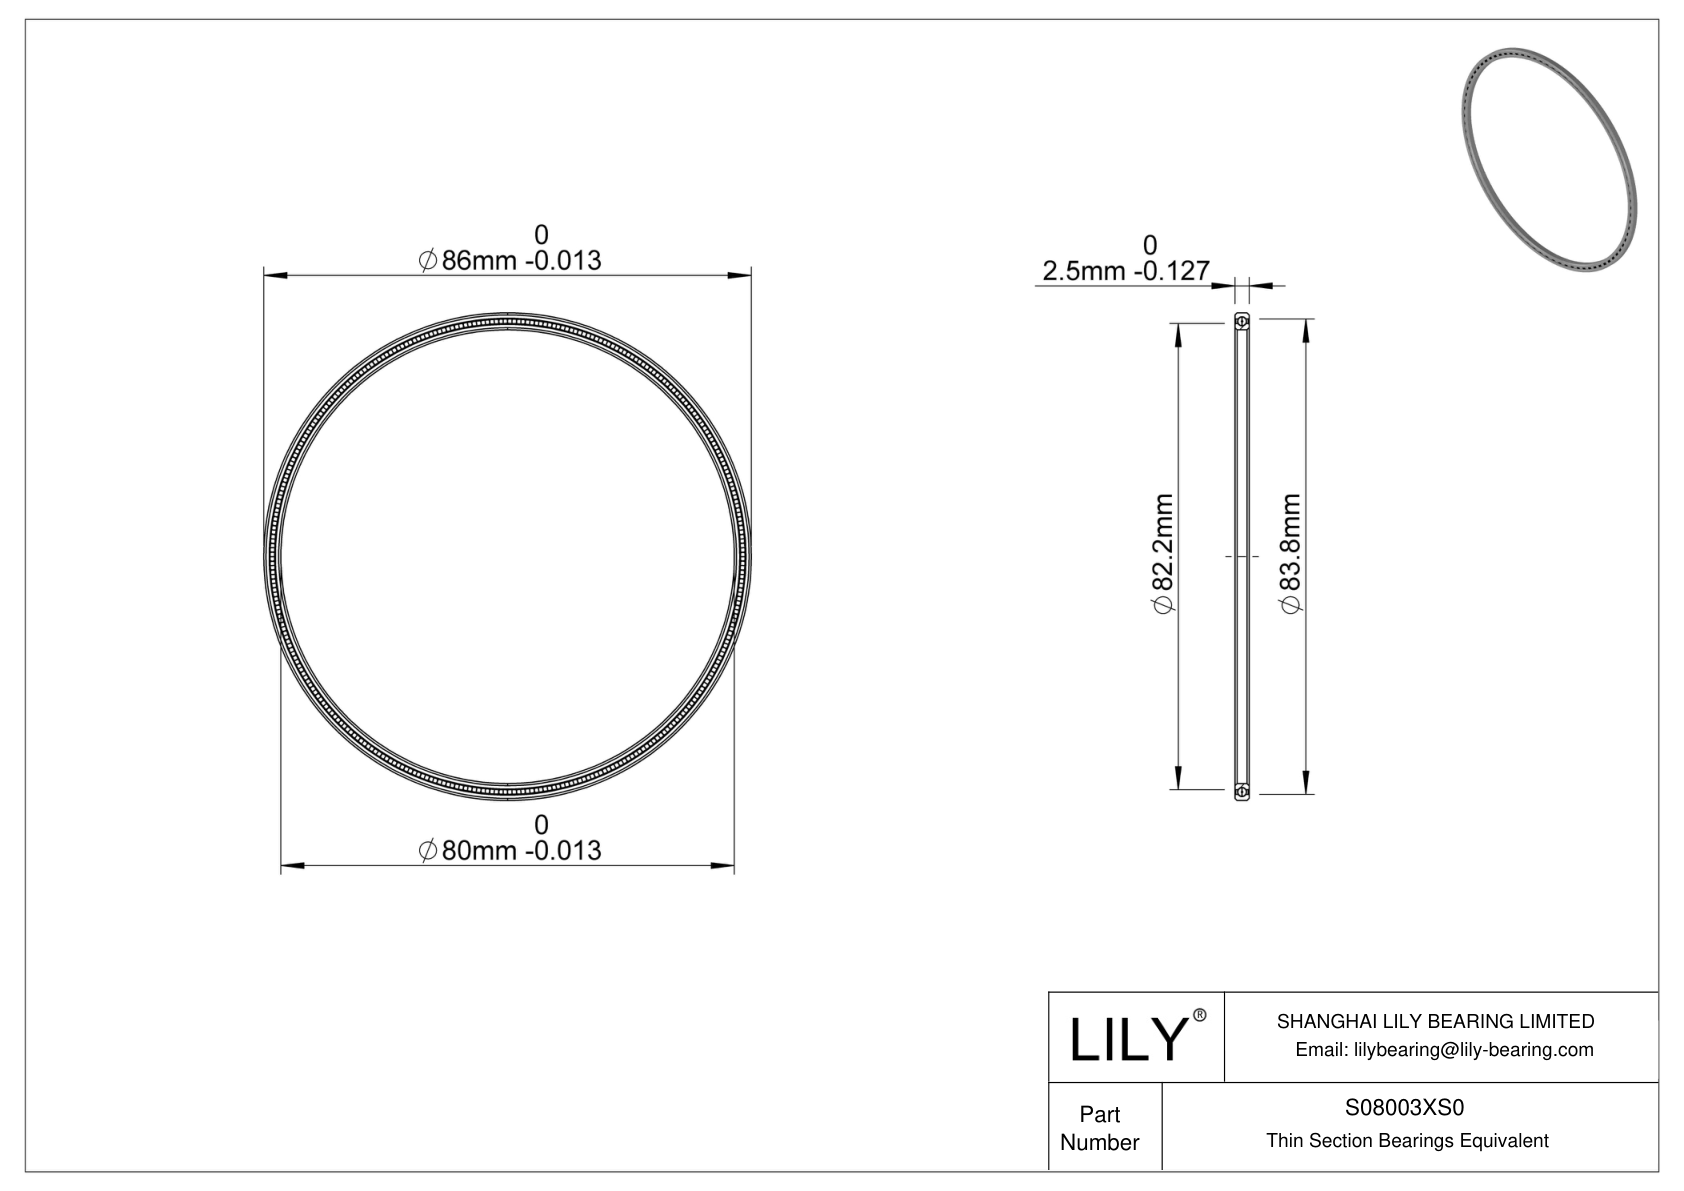 S08003XS0 Constant Section (CS) Bearings cad drawing